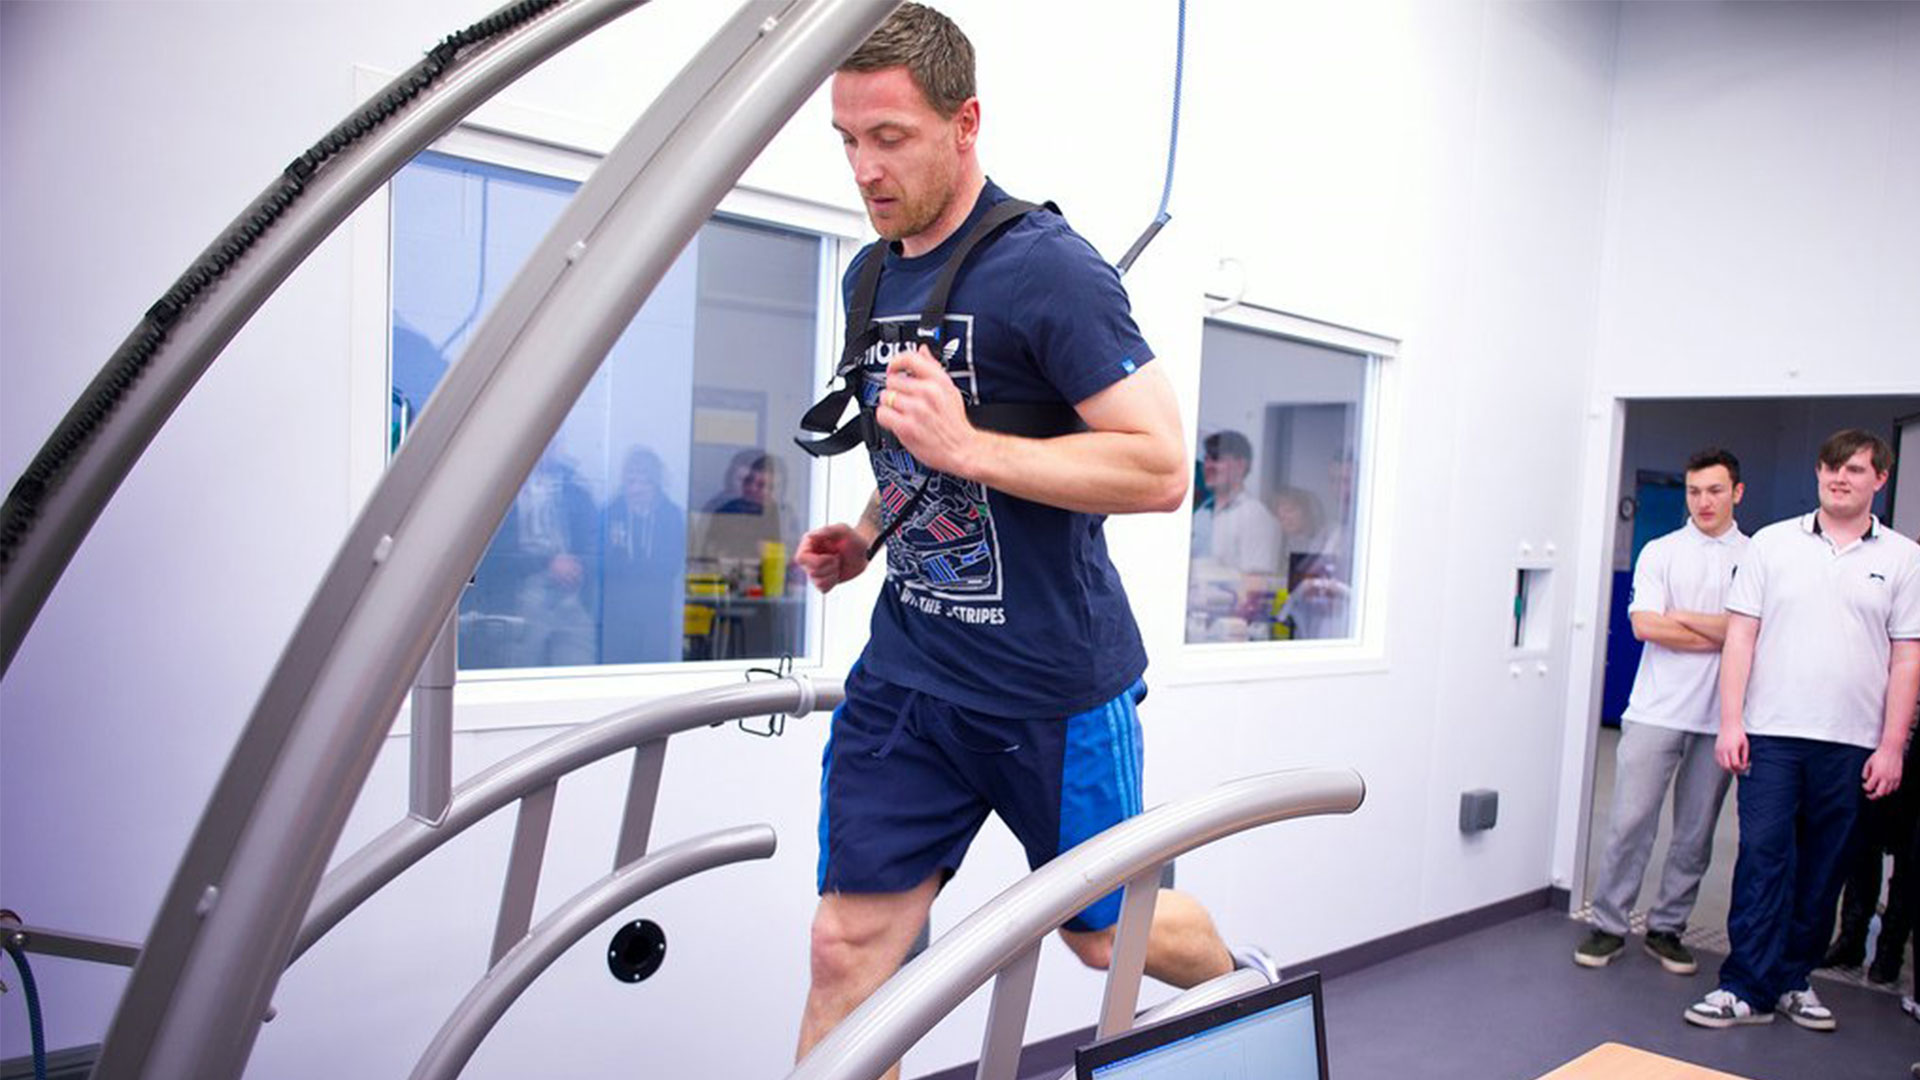 A man running on a treadmill attached to a heart monitor